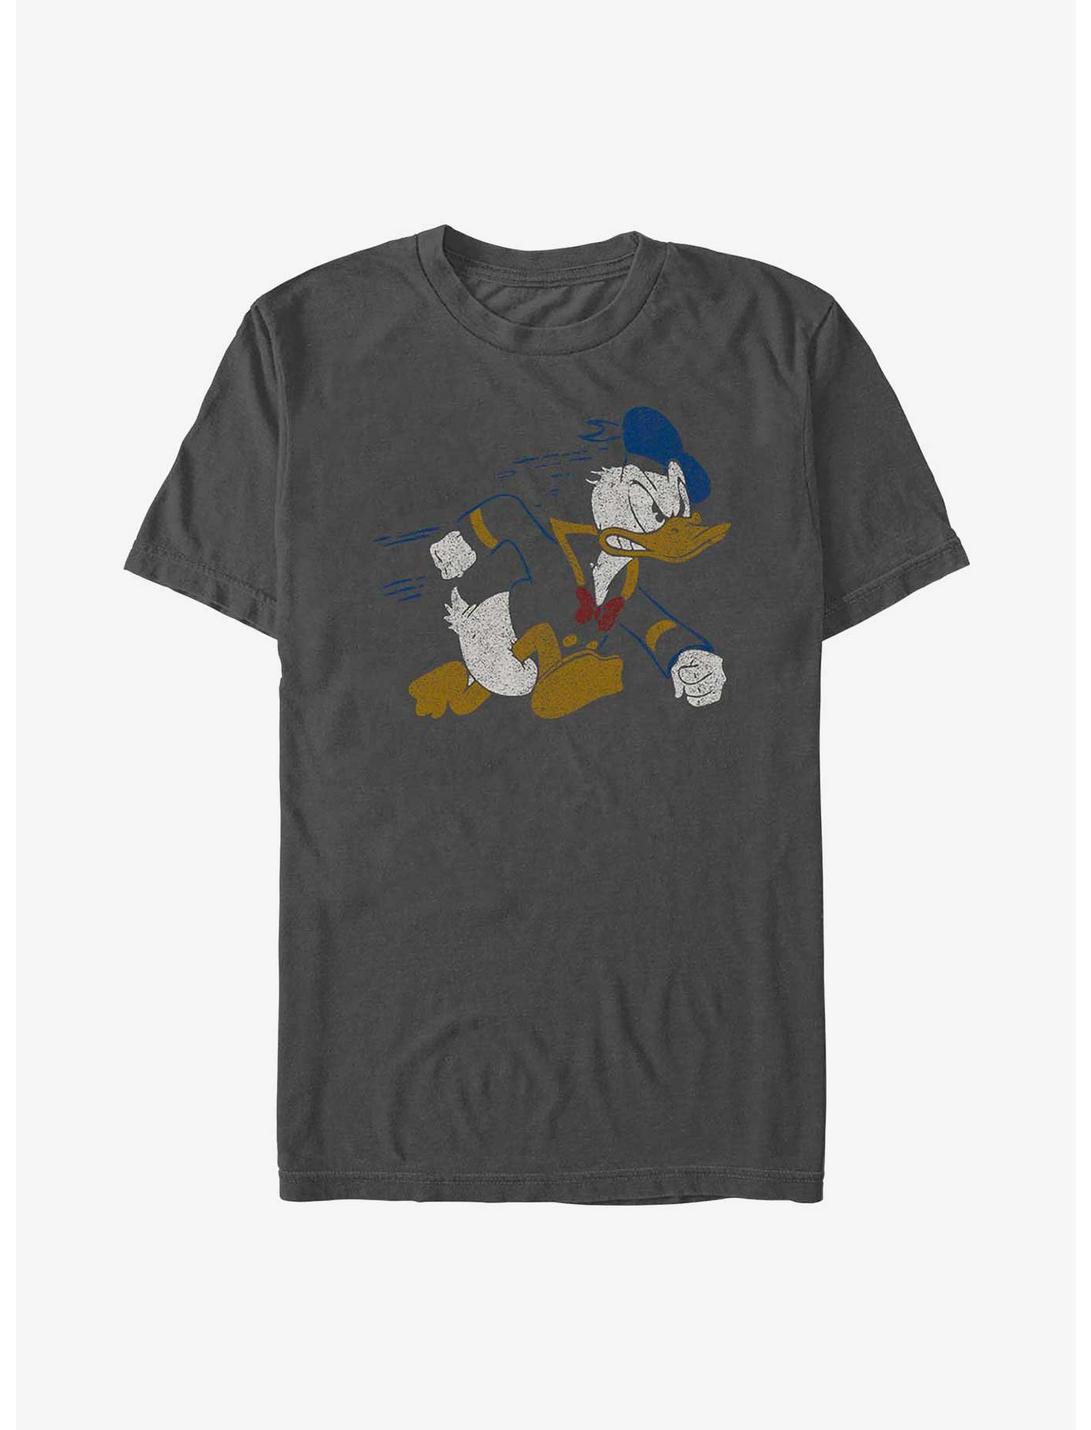 Disney DuckTales Dashing Angry Donald Duck T-Shirt, CHARCOAL, hi-res